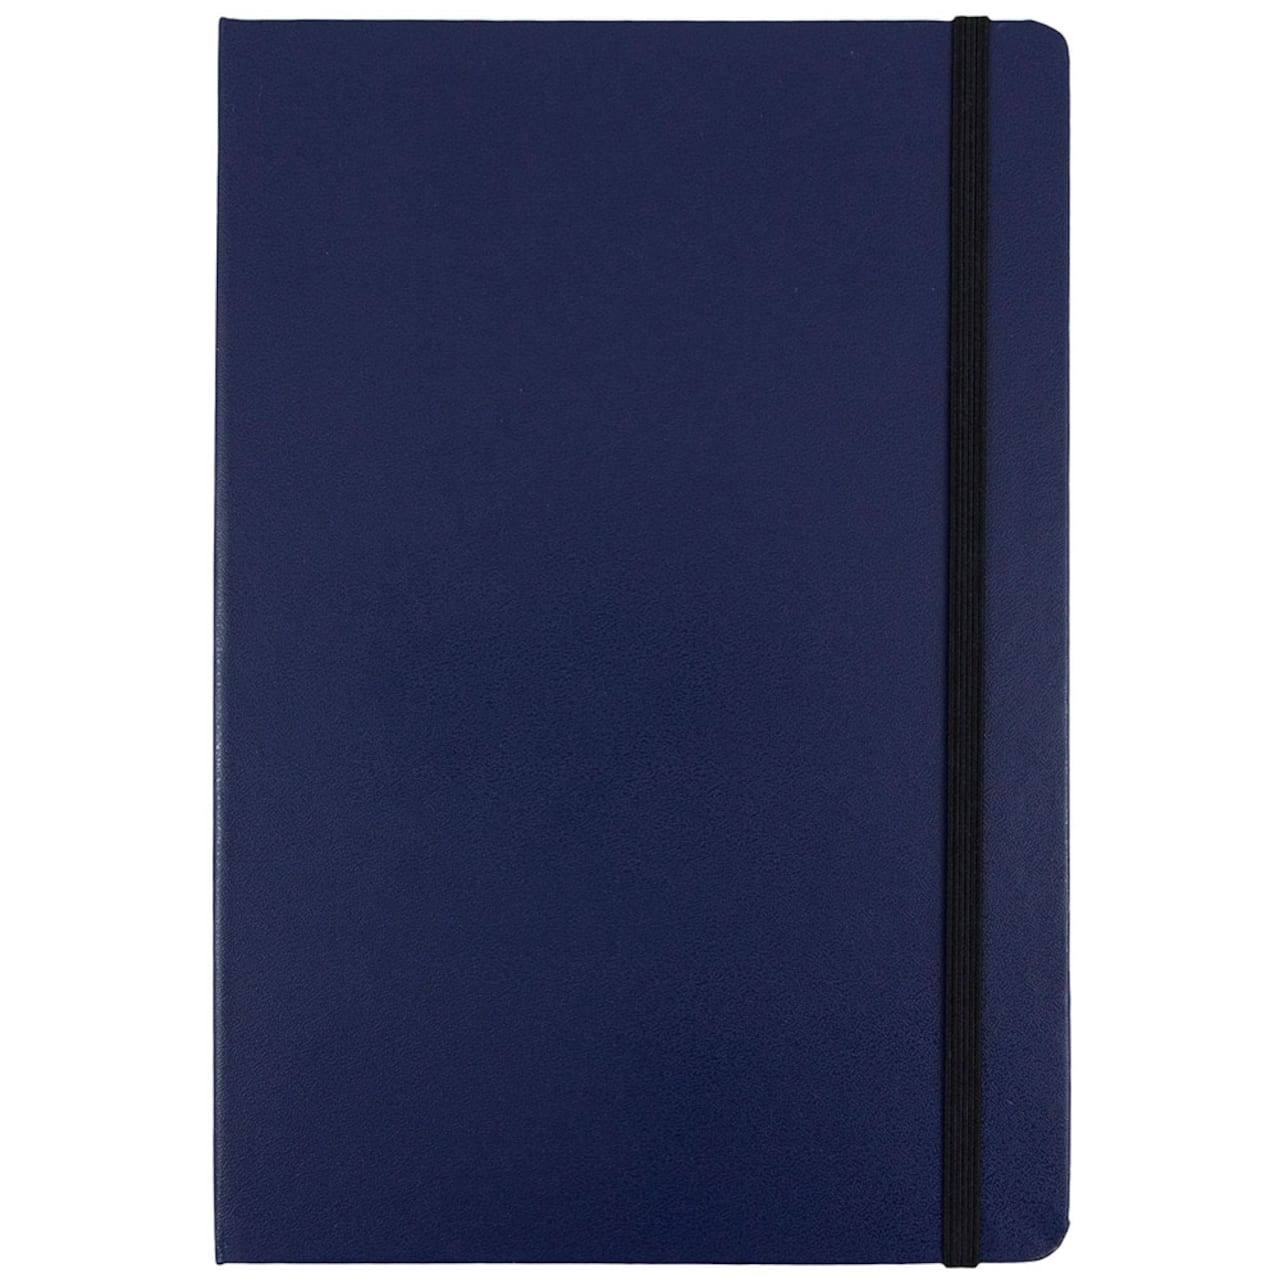 JAM Paper Large Hardcover Notebook with Elastic Band